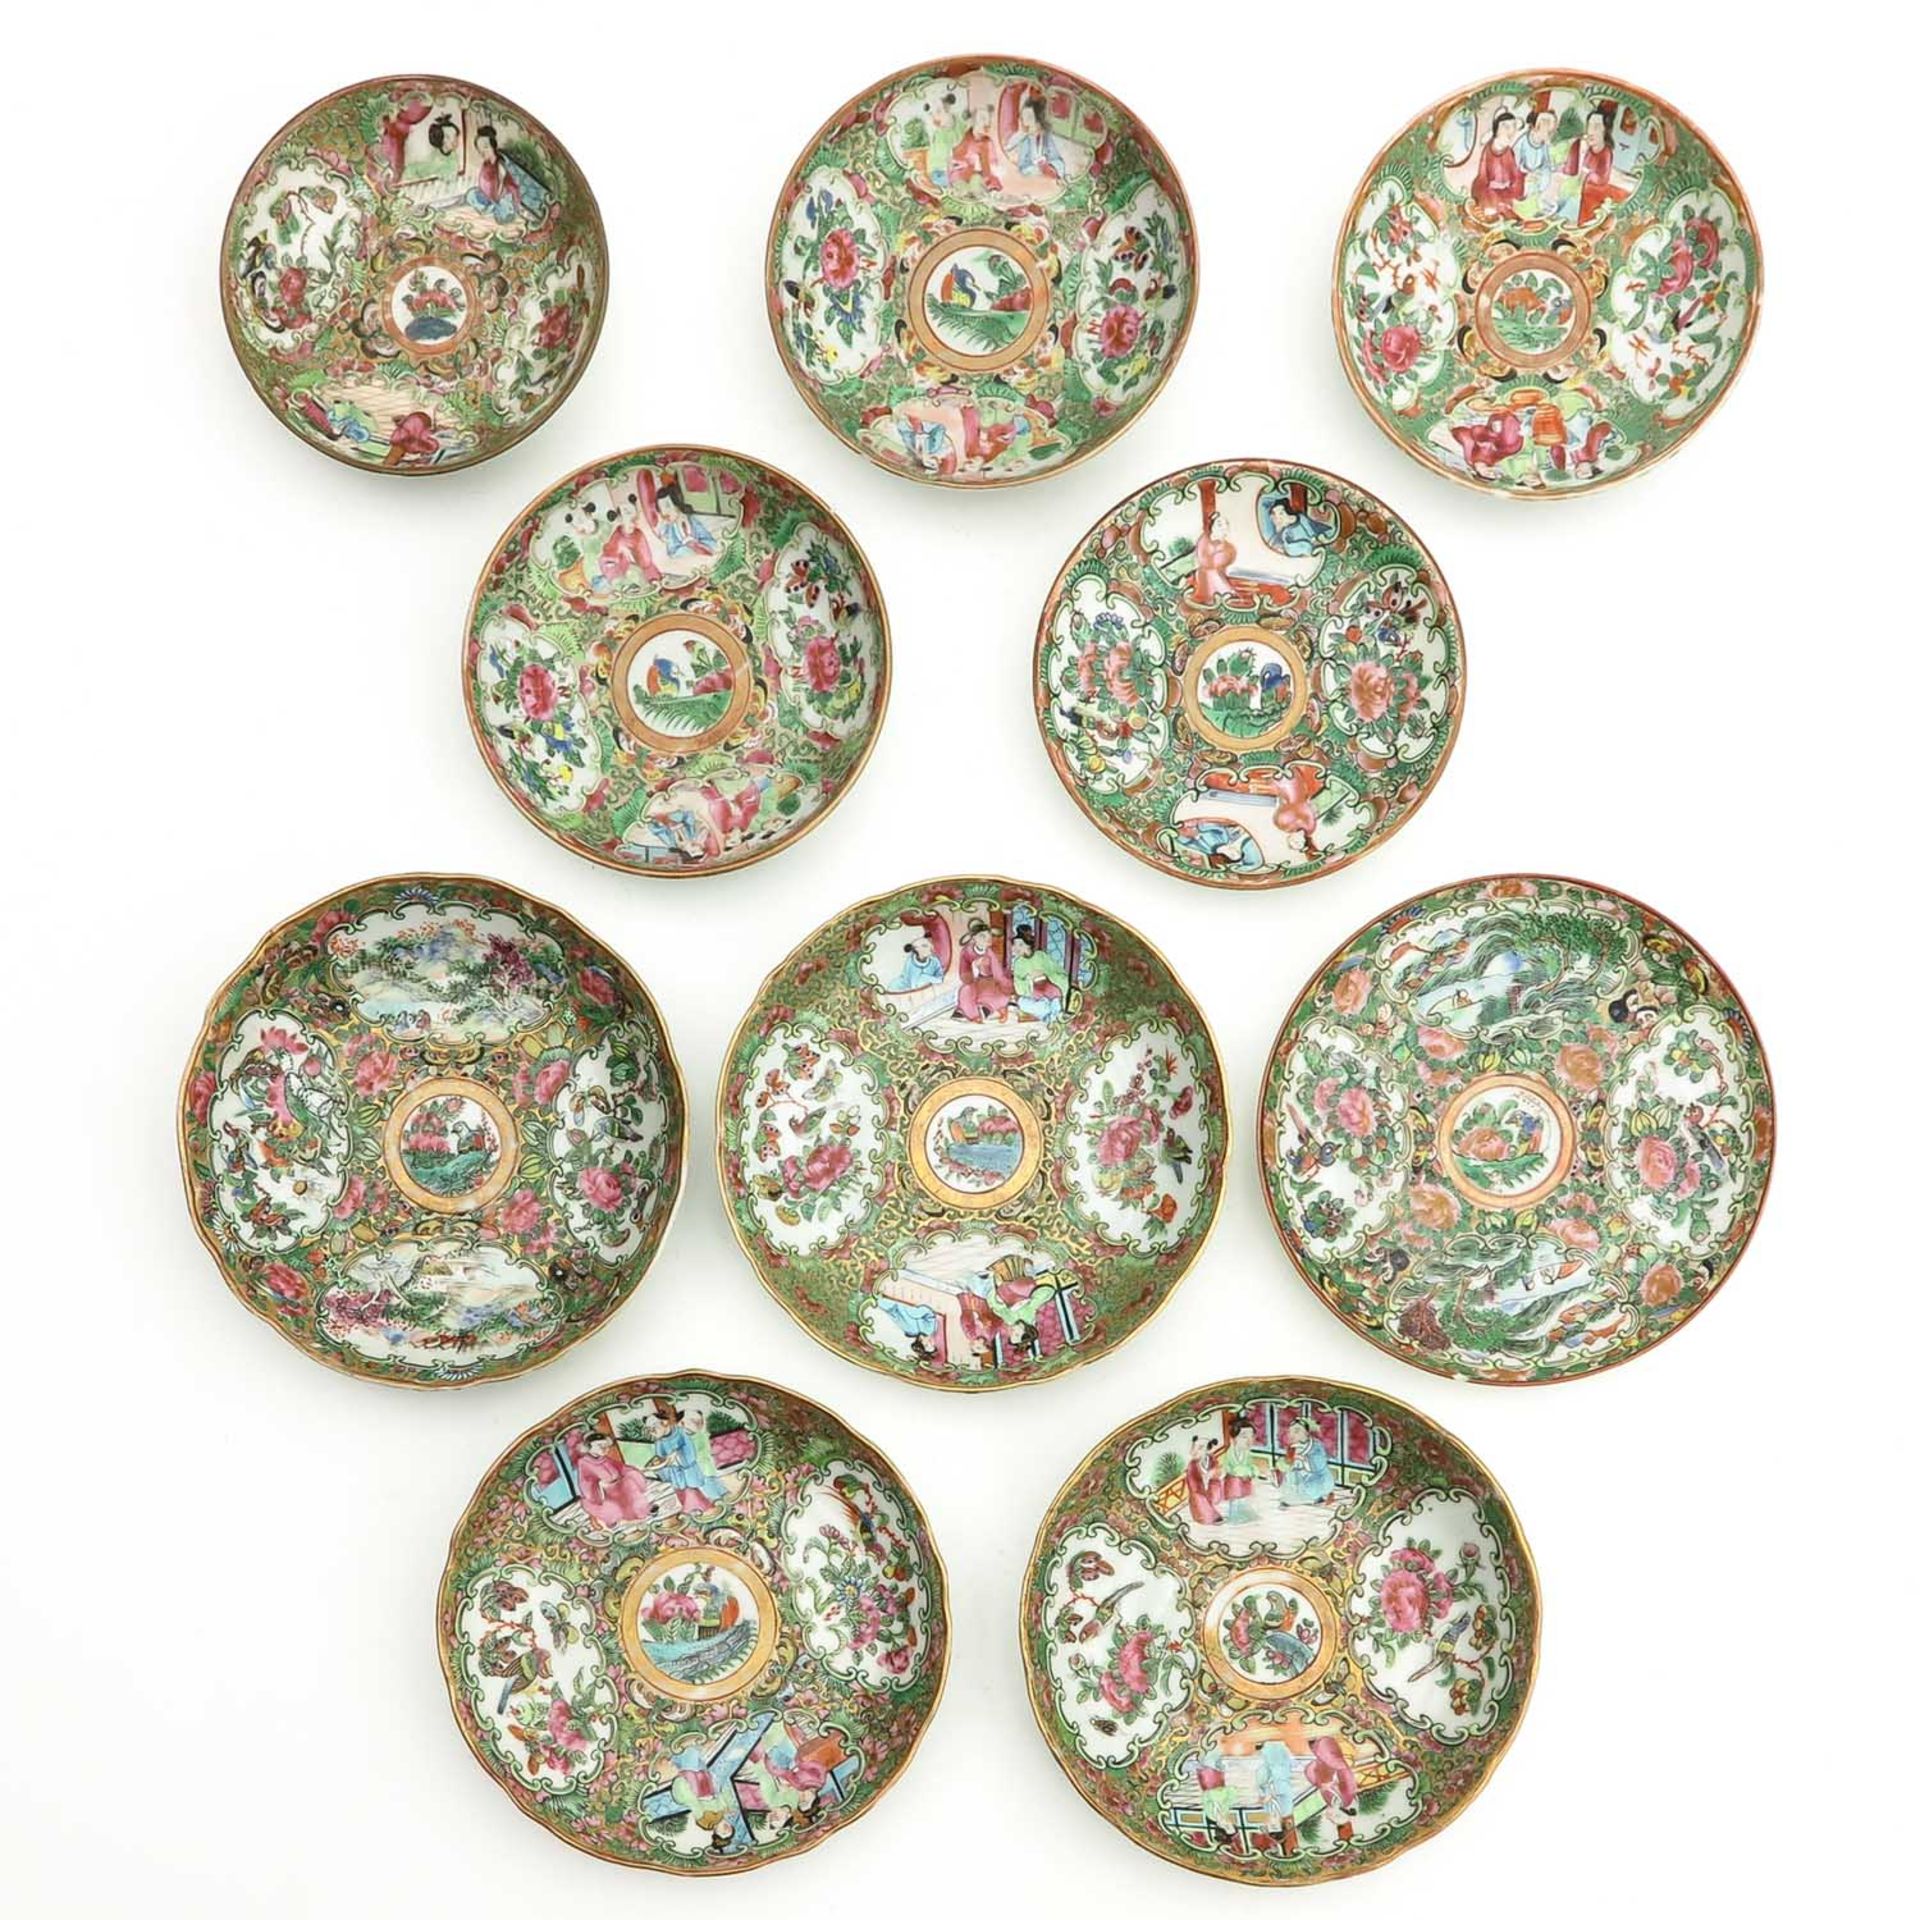 A Collection of 10 Small Cantonese Plates